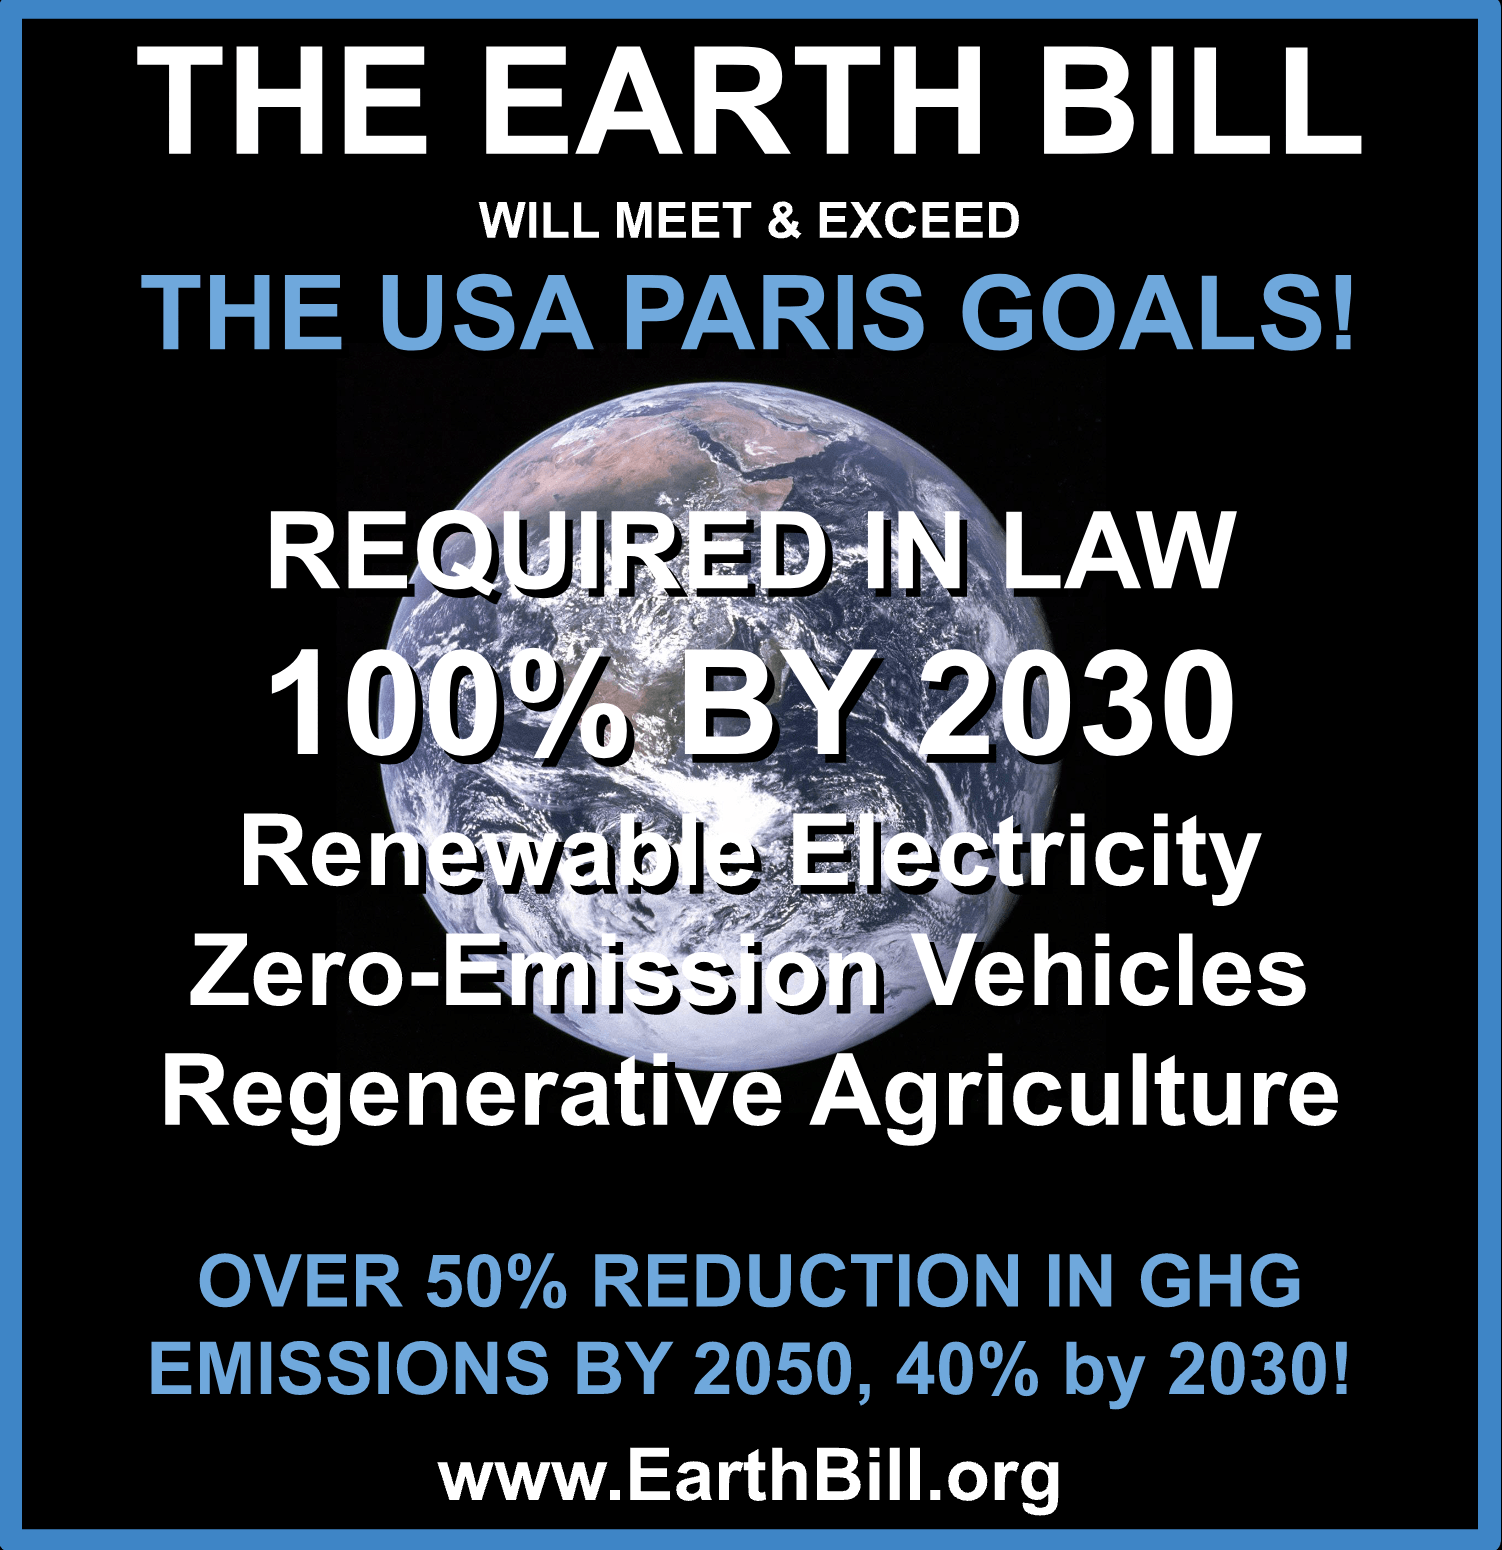 The Earth Bill will meet and exceed the USA Paris goals! Requred in law 100% by 2030 renewable electricity, zero-emission vehicles, regenerative agriculture. Over 50% reduction in GHG emissions by 2050, 40% by 2030! www.earthbill.org